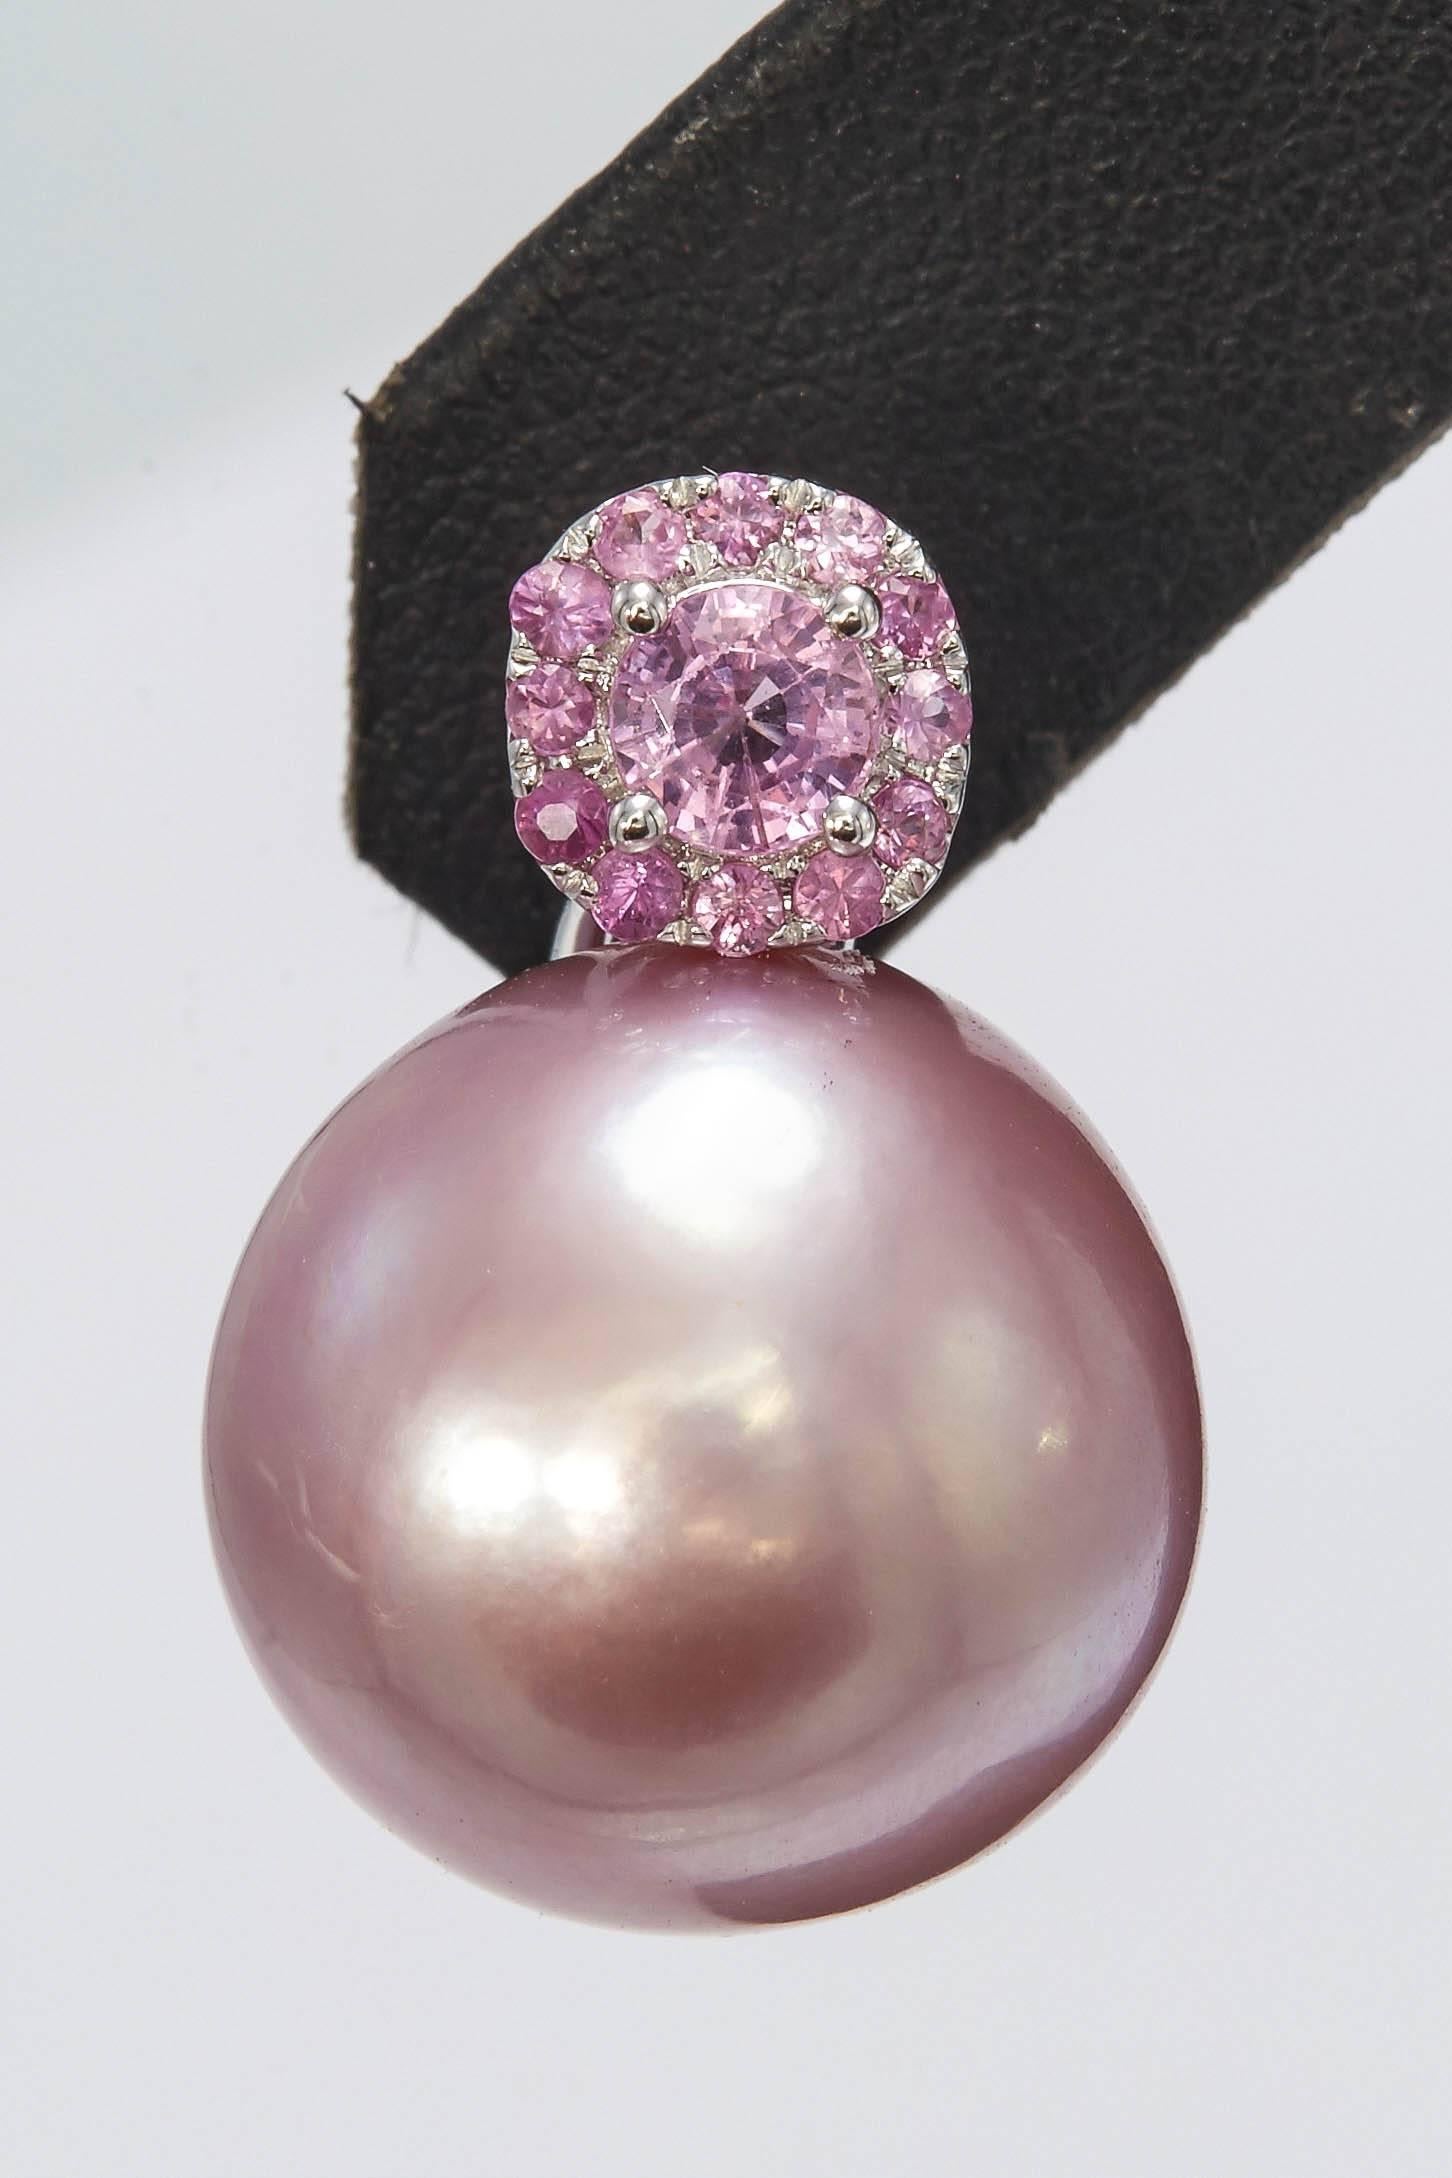 14-15 mm Pink Freshwater Pearls 
0.80 Carats Pink Sapphires
18K White Gold